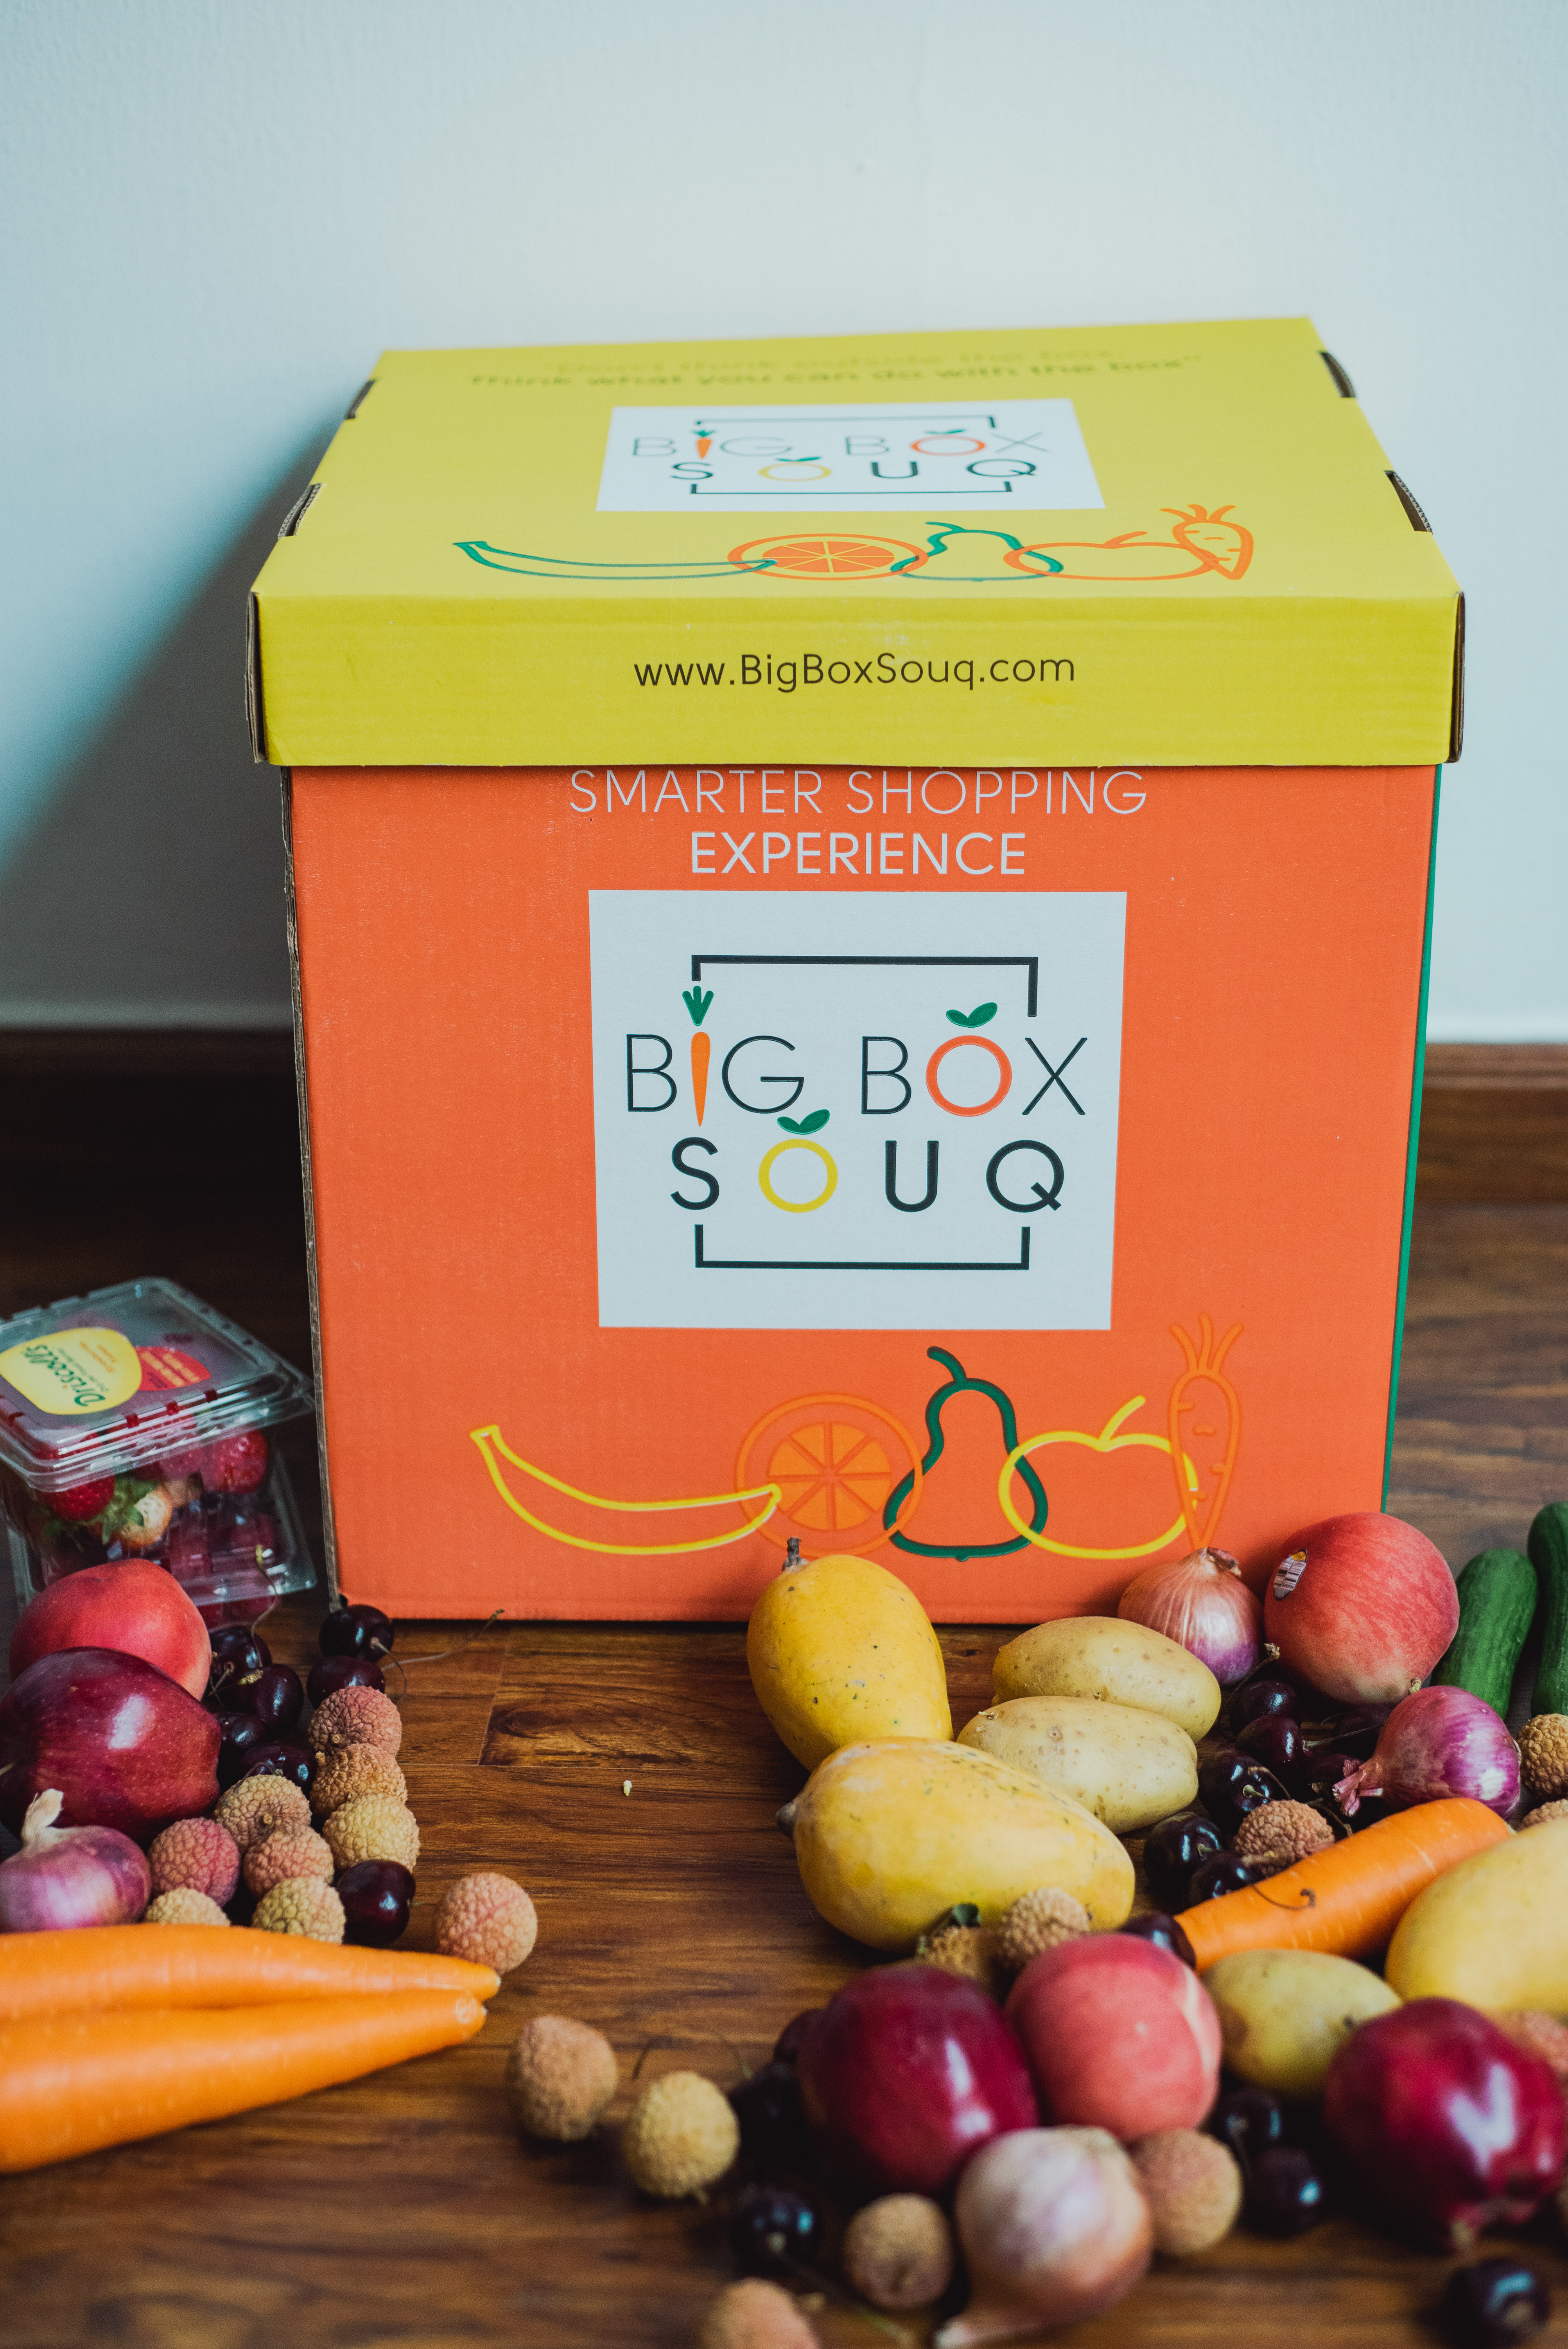 Woman led “Big Box Souq” an innovative shopping app Launched in UAE